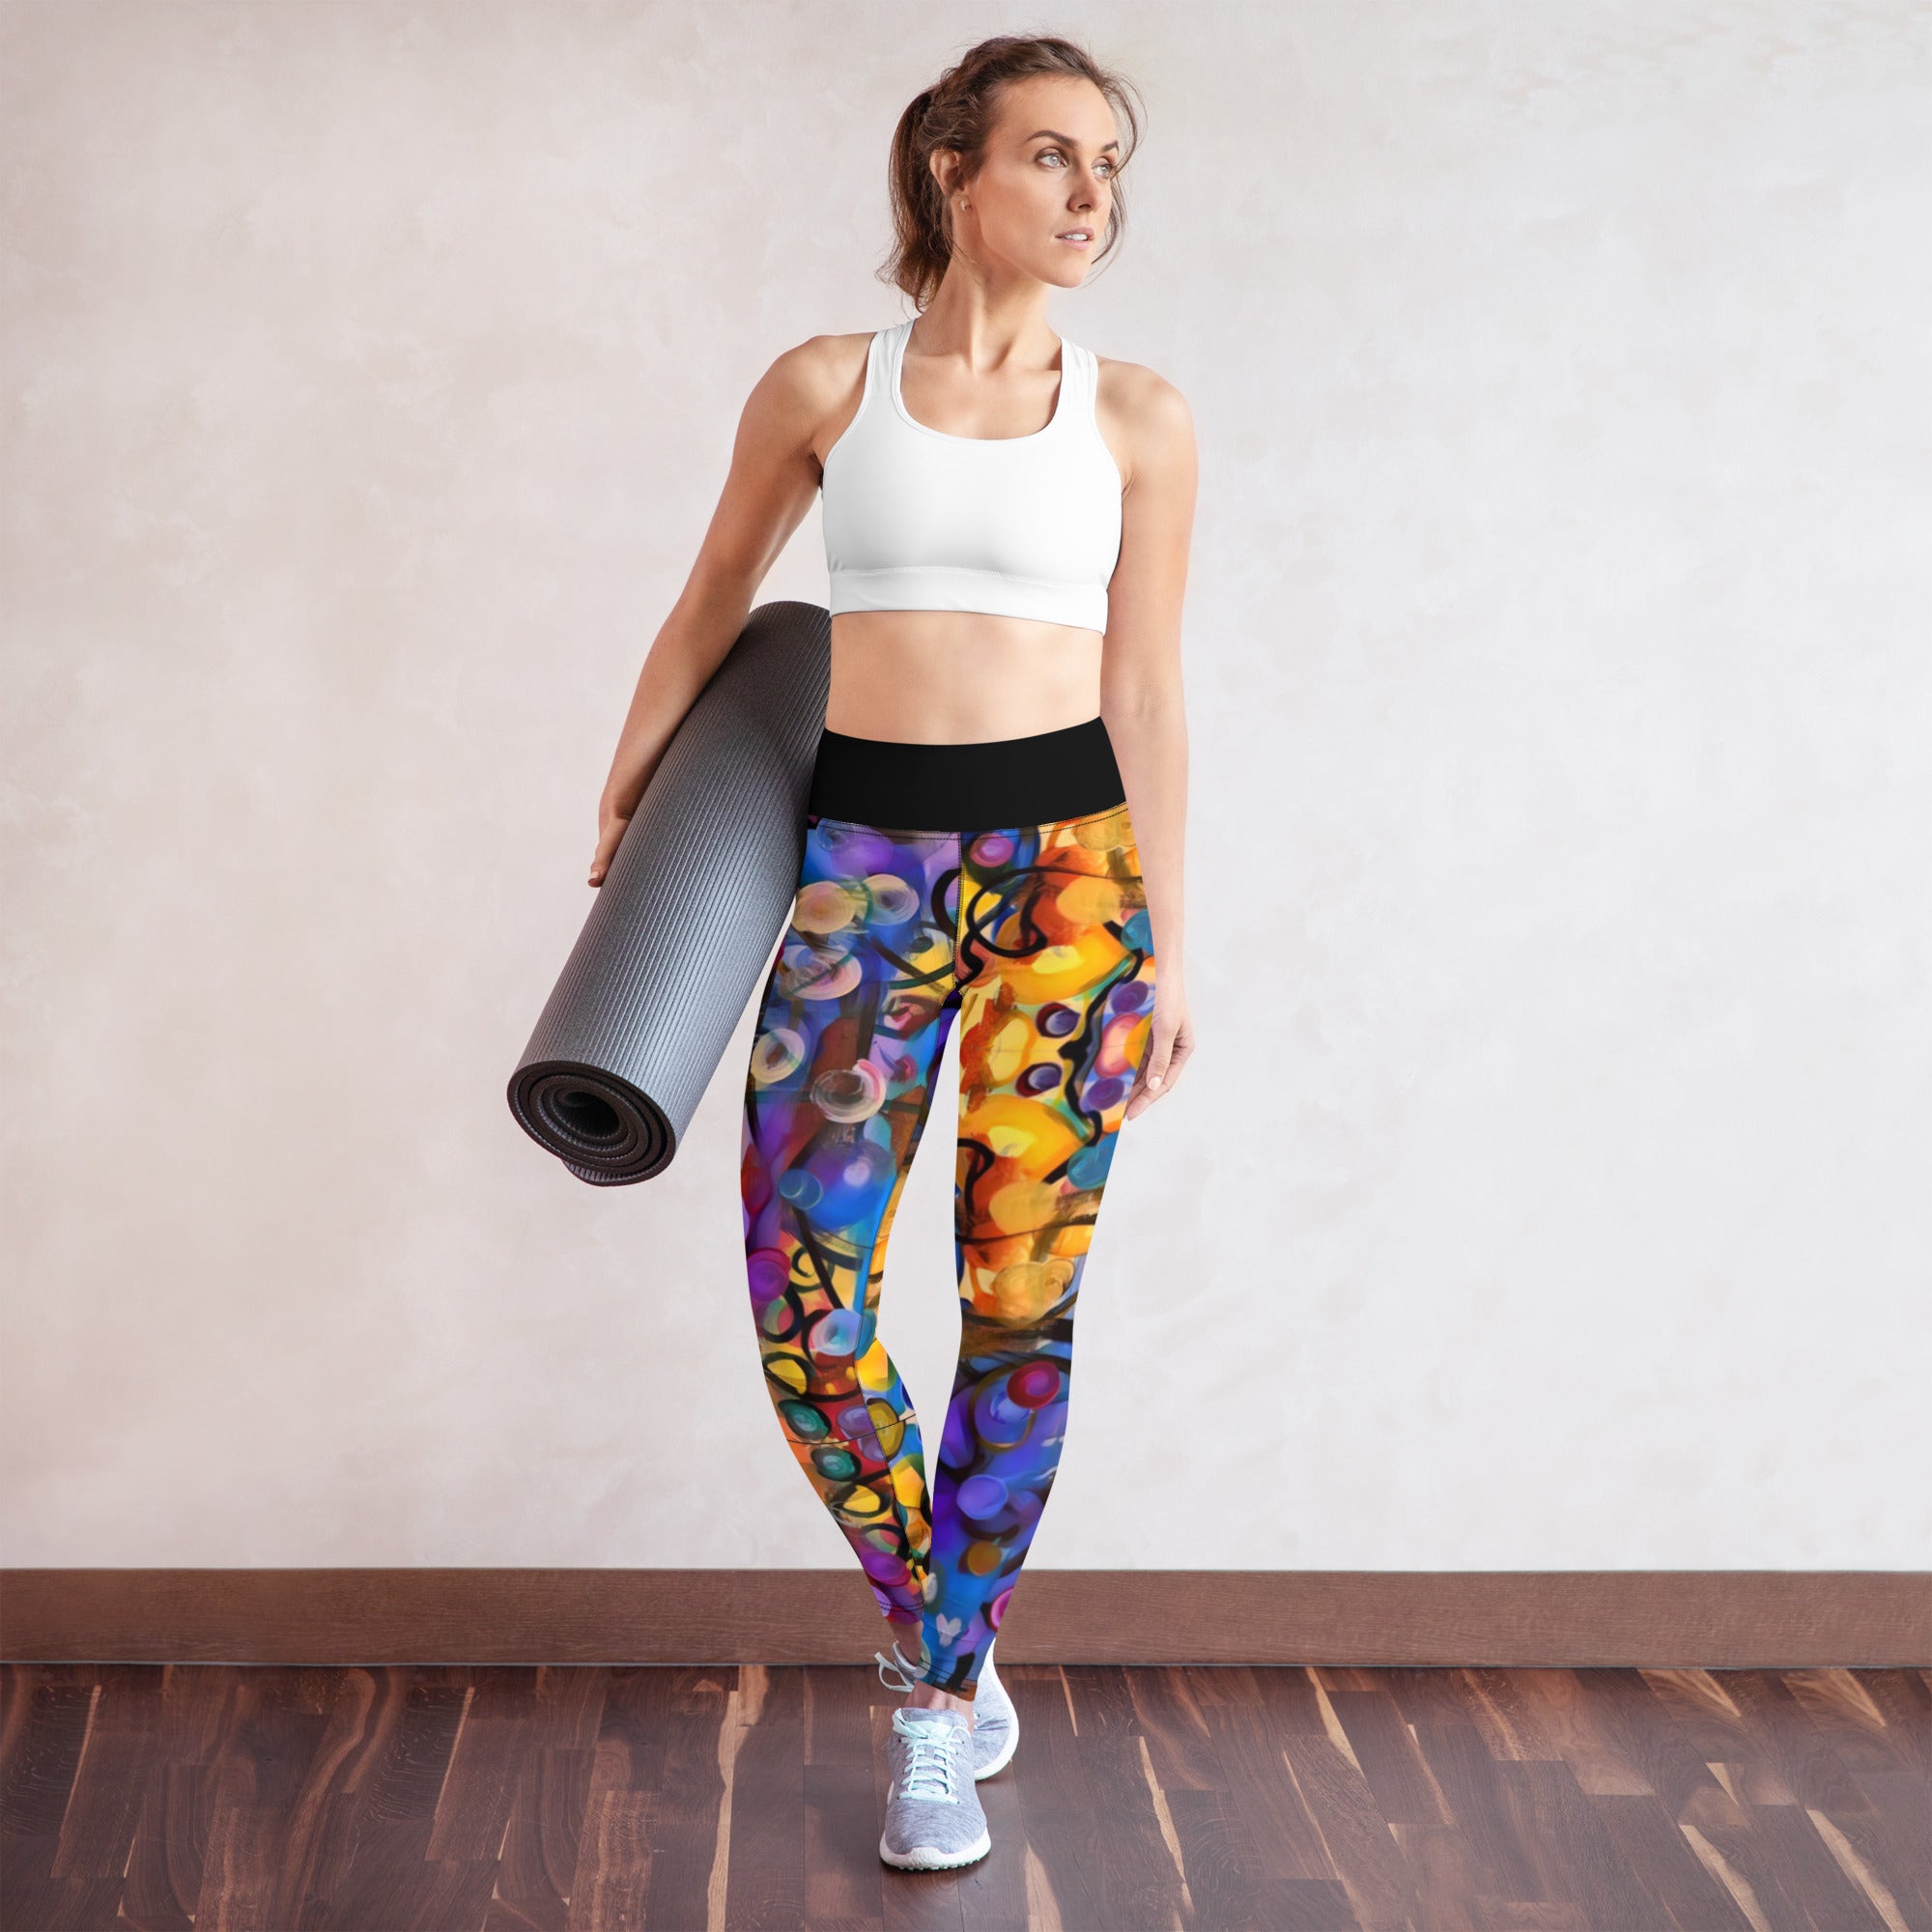  French Laundry Leggings Sports Yoga Pants Colorful Independence  Day Printed Leggings Business Casual Outfits for : Clothing, Shoes & Jewelry